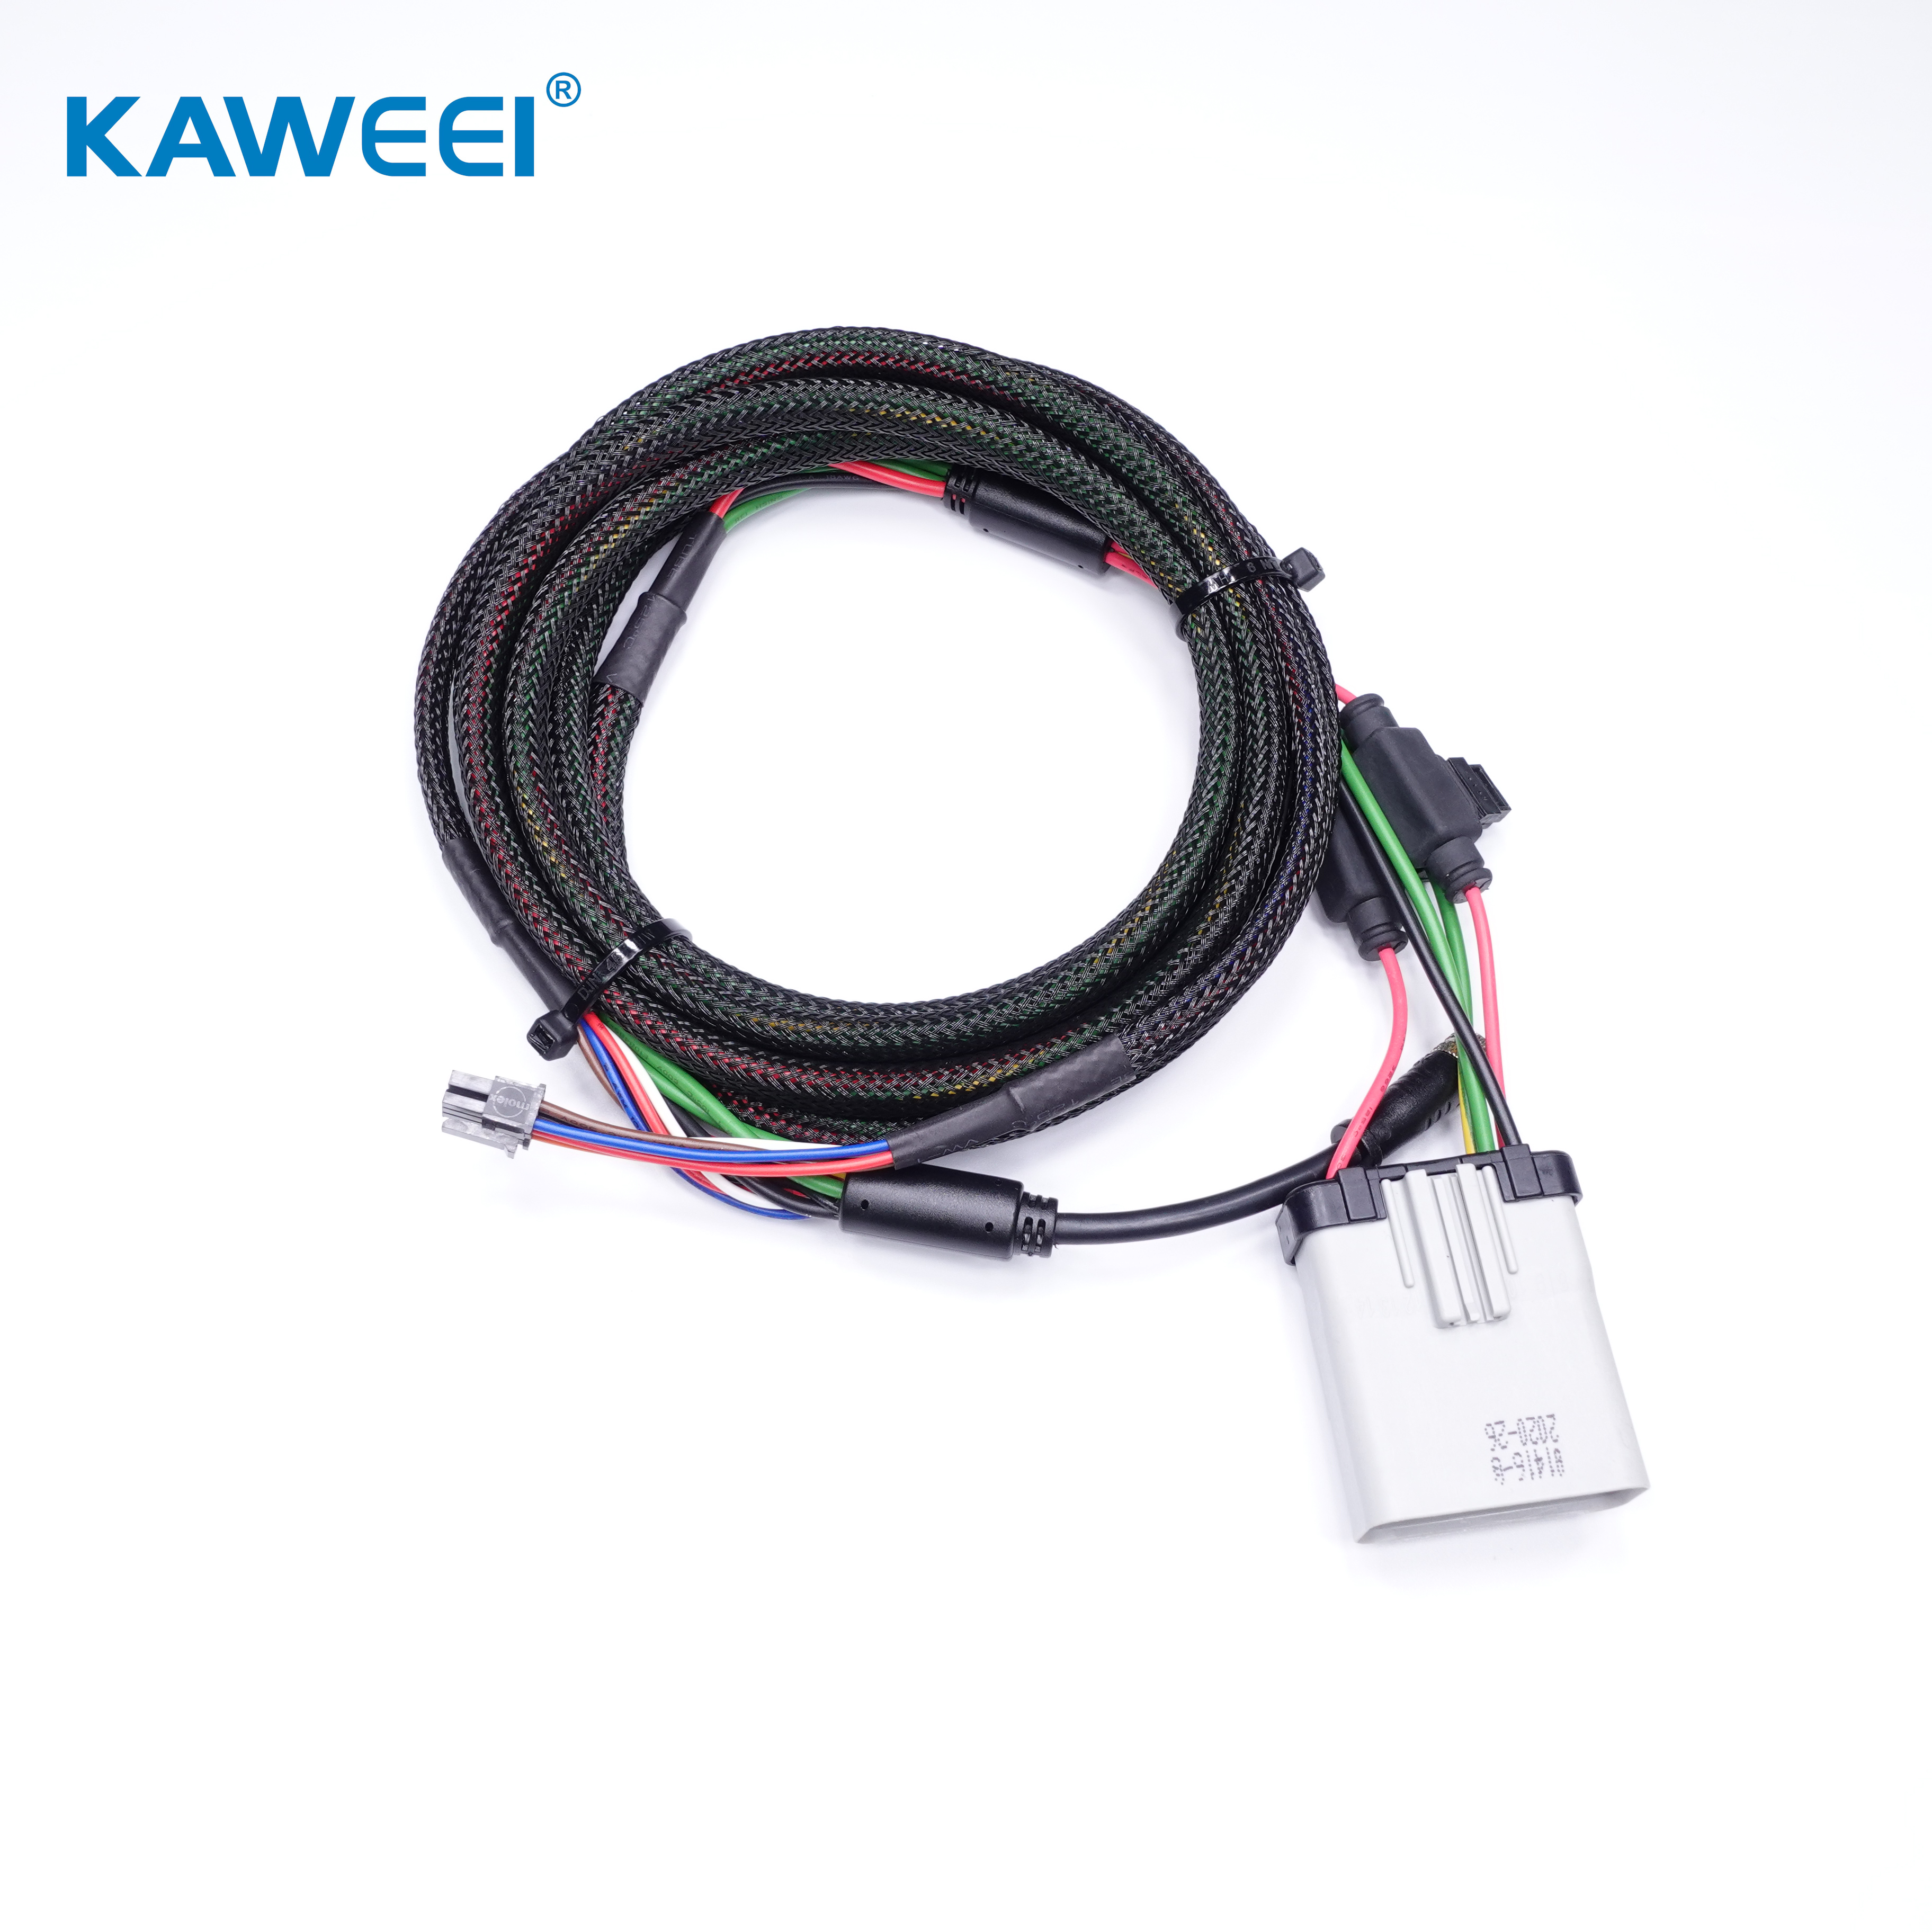 ODM OEM Automobile Wiring Harness for Automotive Machine Cable Assembly Vehicle Wire Harness